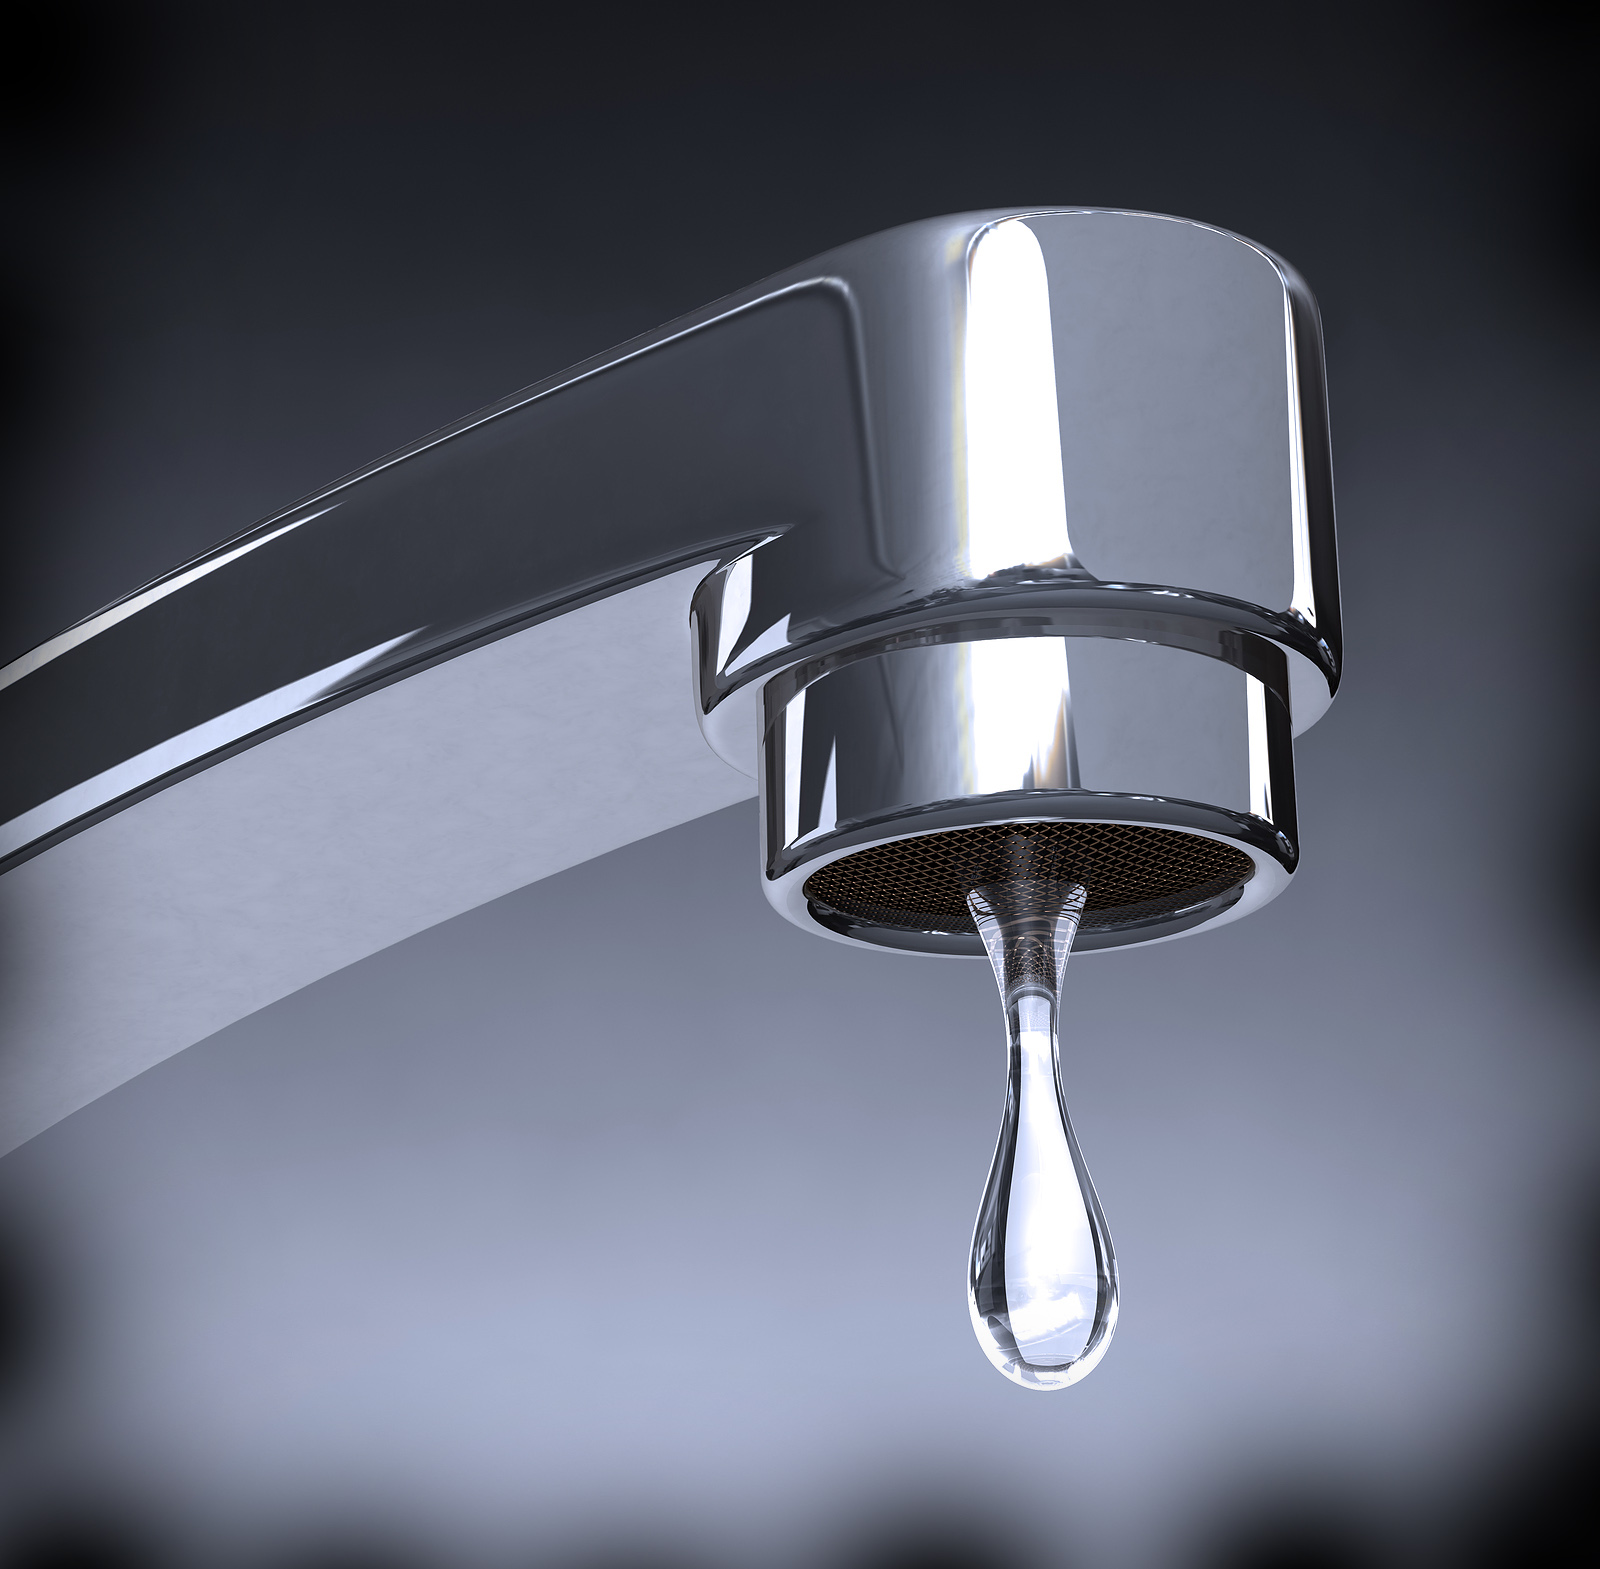 A water Leak Detection Service in Ampthill depicted by a photograph of a faucet with a droplet.